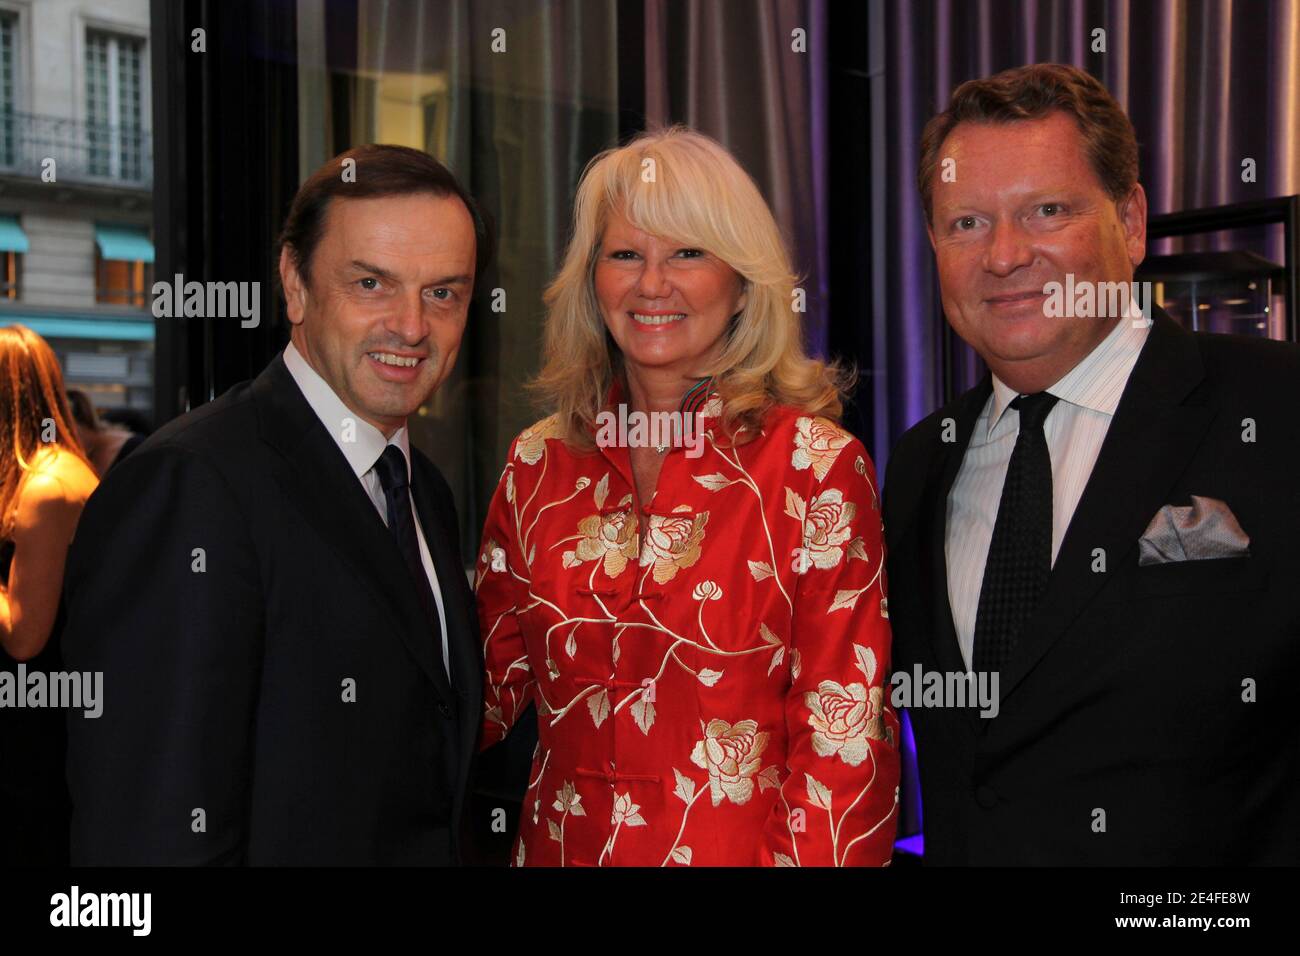 President of Montblanc Lutz Bethge (L), Ingrid Roosen-Trinks (C) and  Managing director of Mont-Blanc France Michel Ade attend the Montblanc  Paris Flagship Boutique Launch - Inauguration Cocktail party, in Paris,  France, on